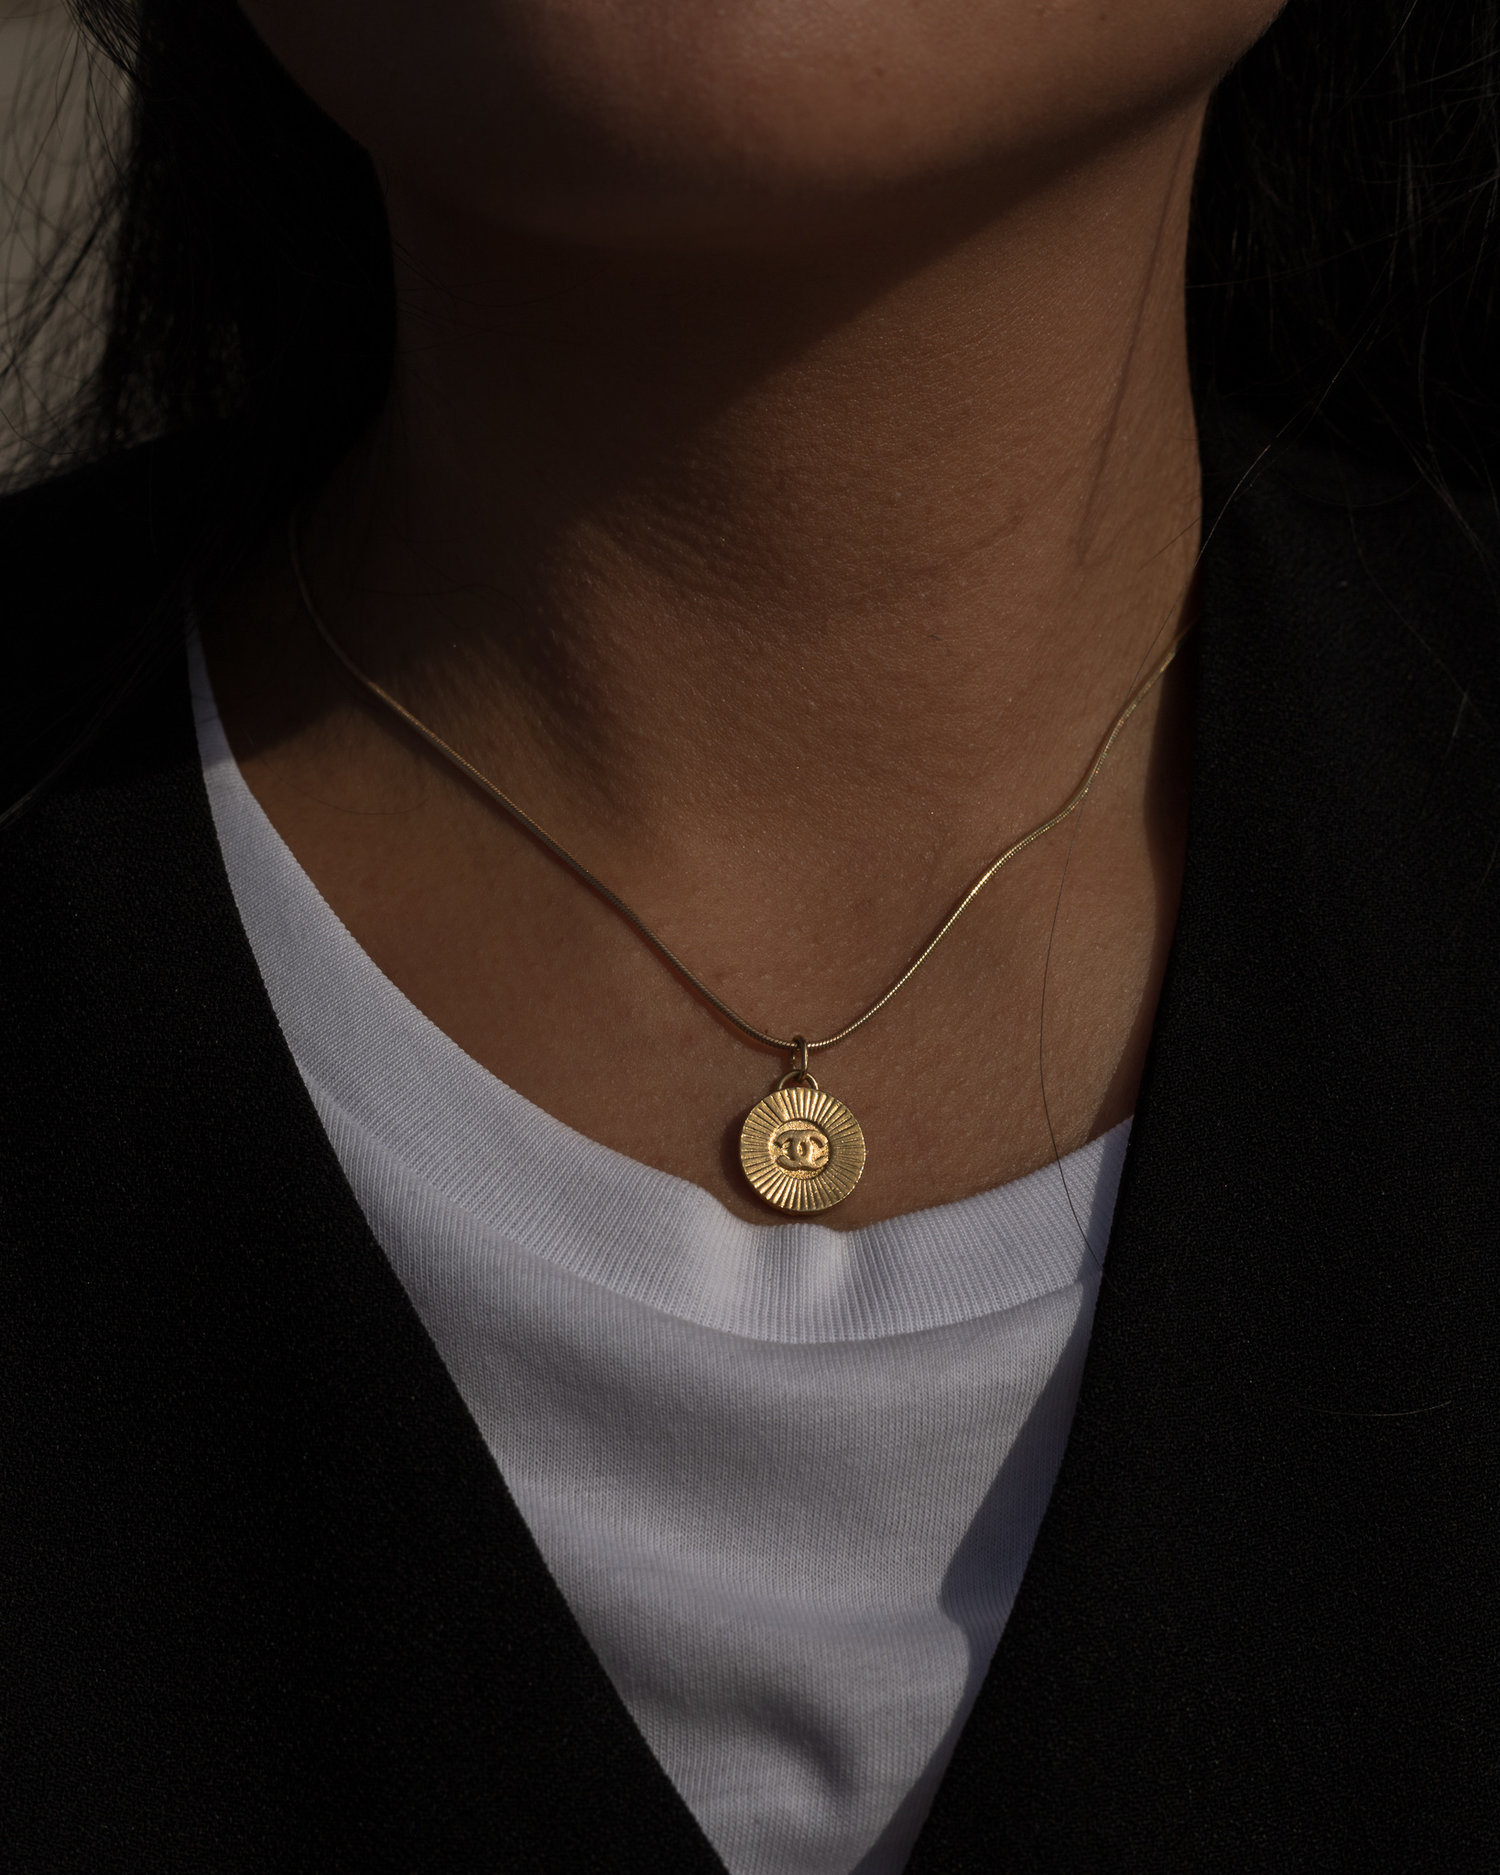 CC Embellished Gold Chanel Button Pendant Necklace (2 sizes, PRE